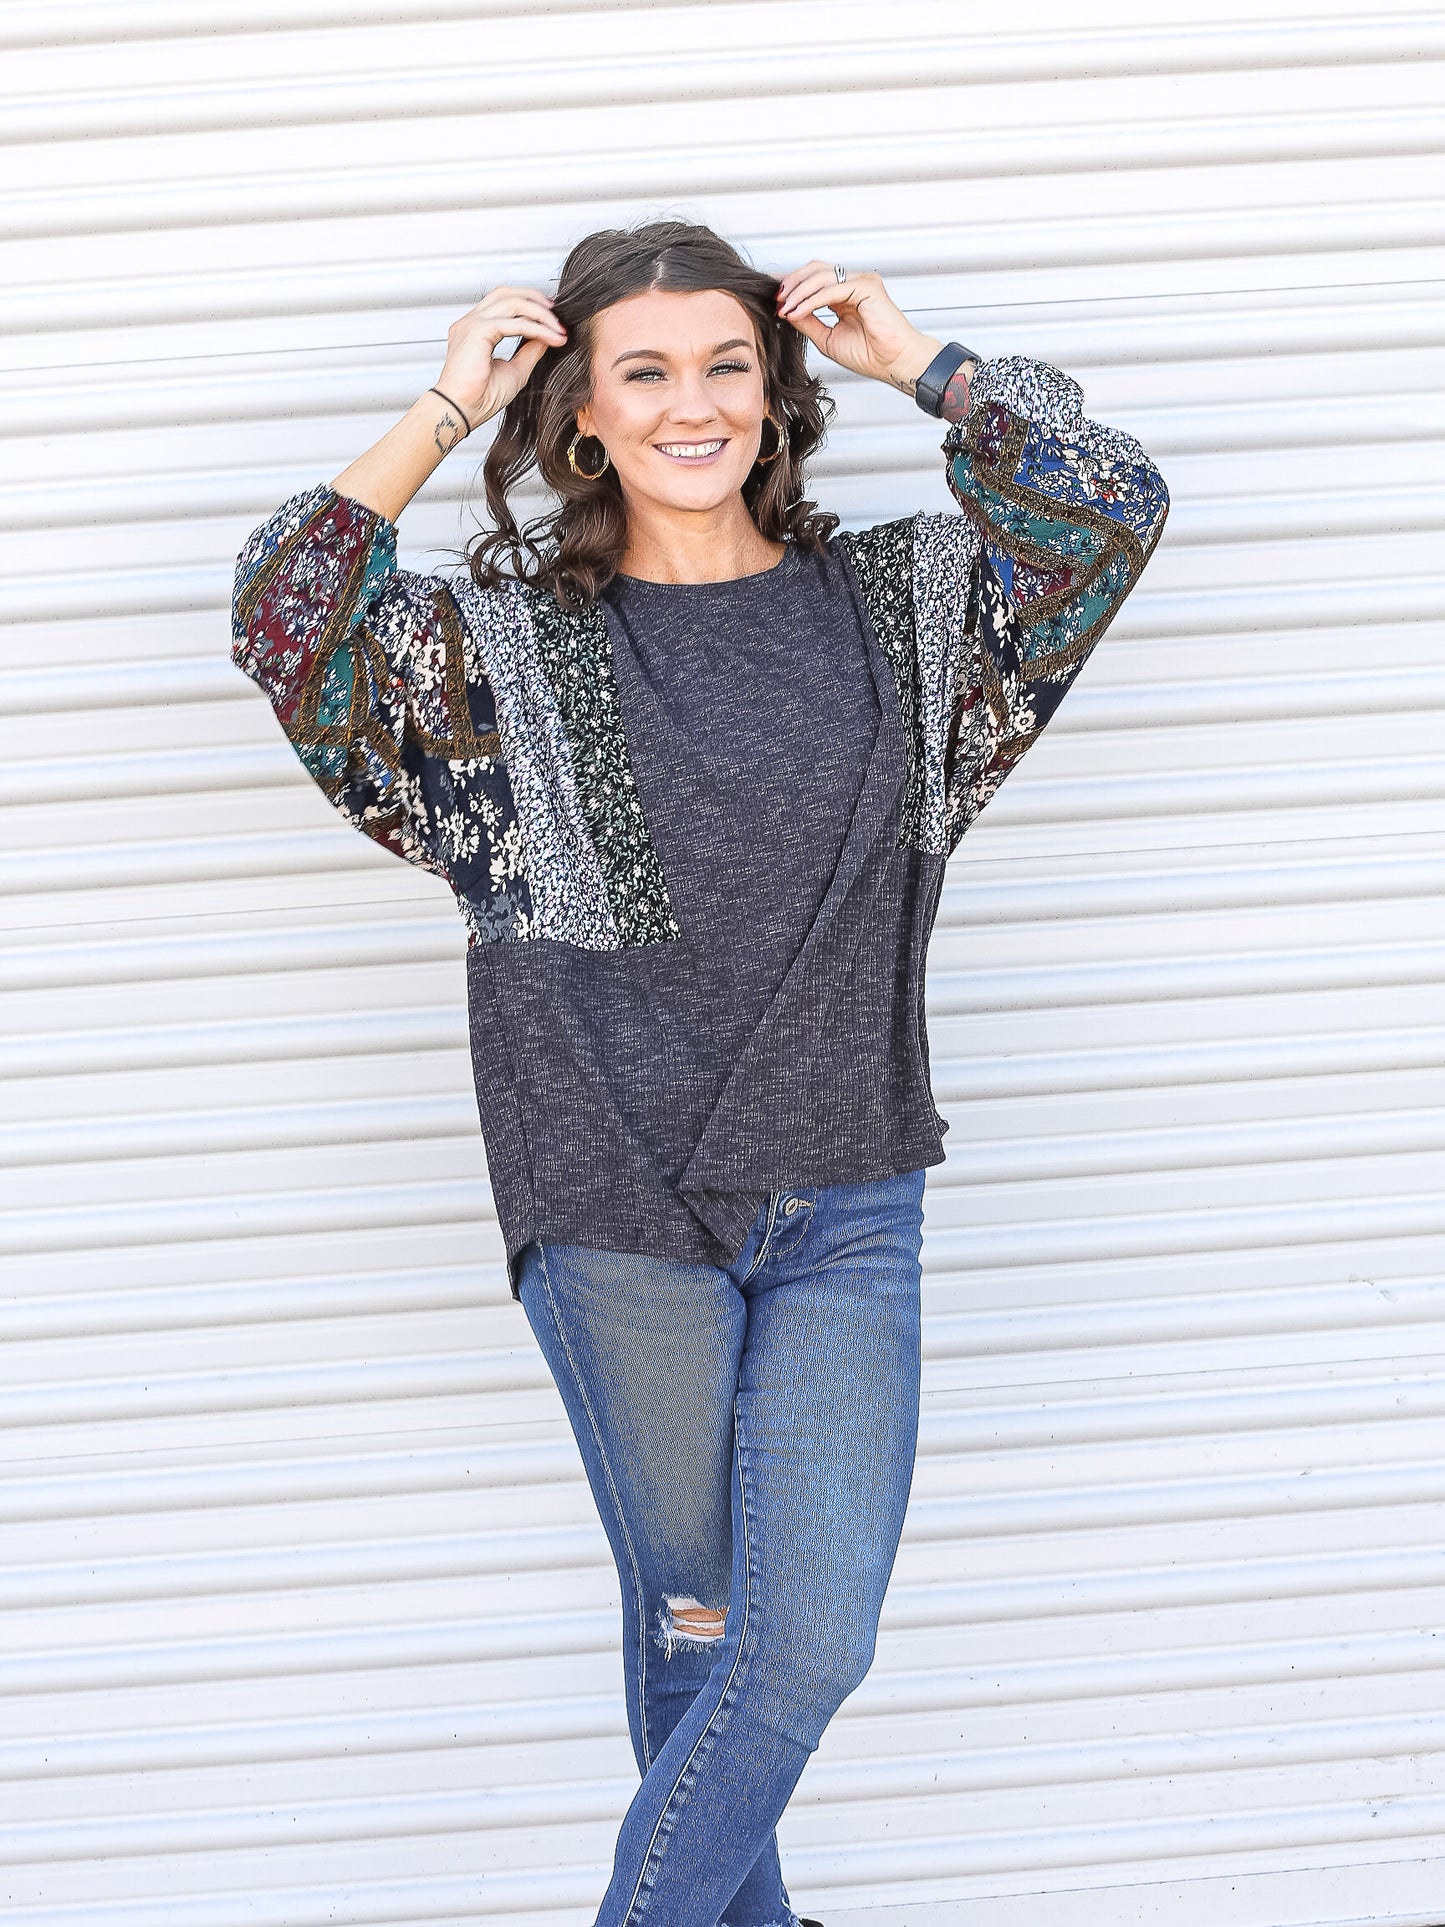 Tiffany in the beautiful floral sleeved dolman